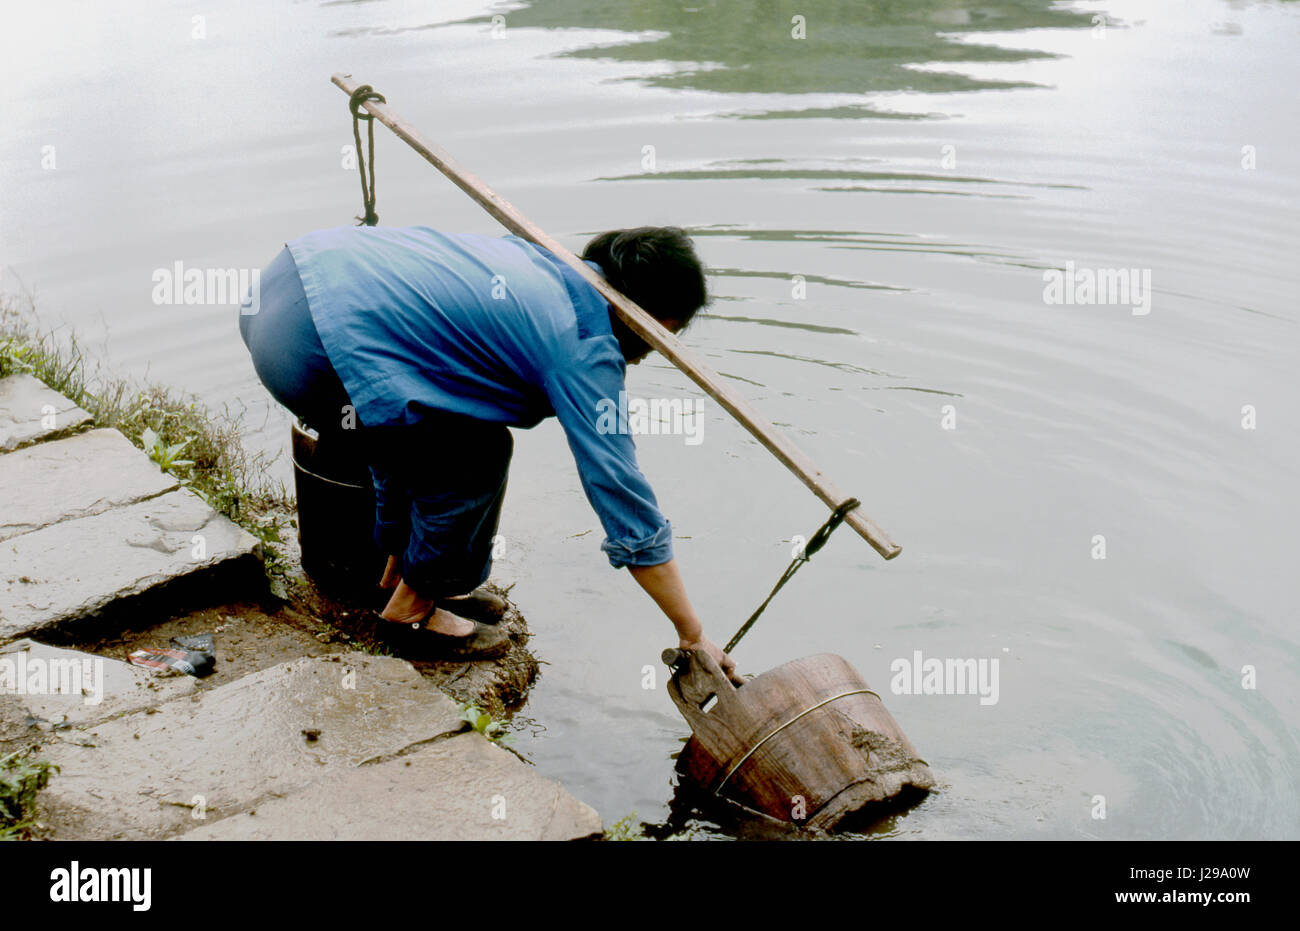 Woman using bucket to fetch water from the river, Guizhou Province, China. Stock Photo